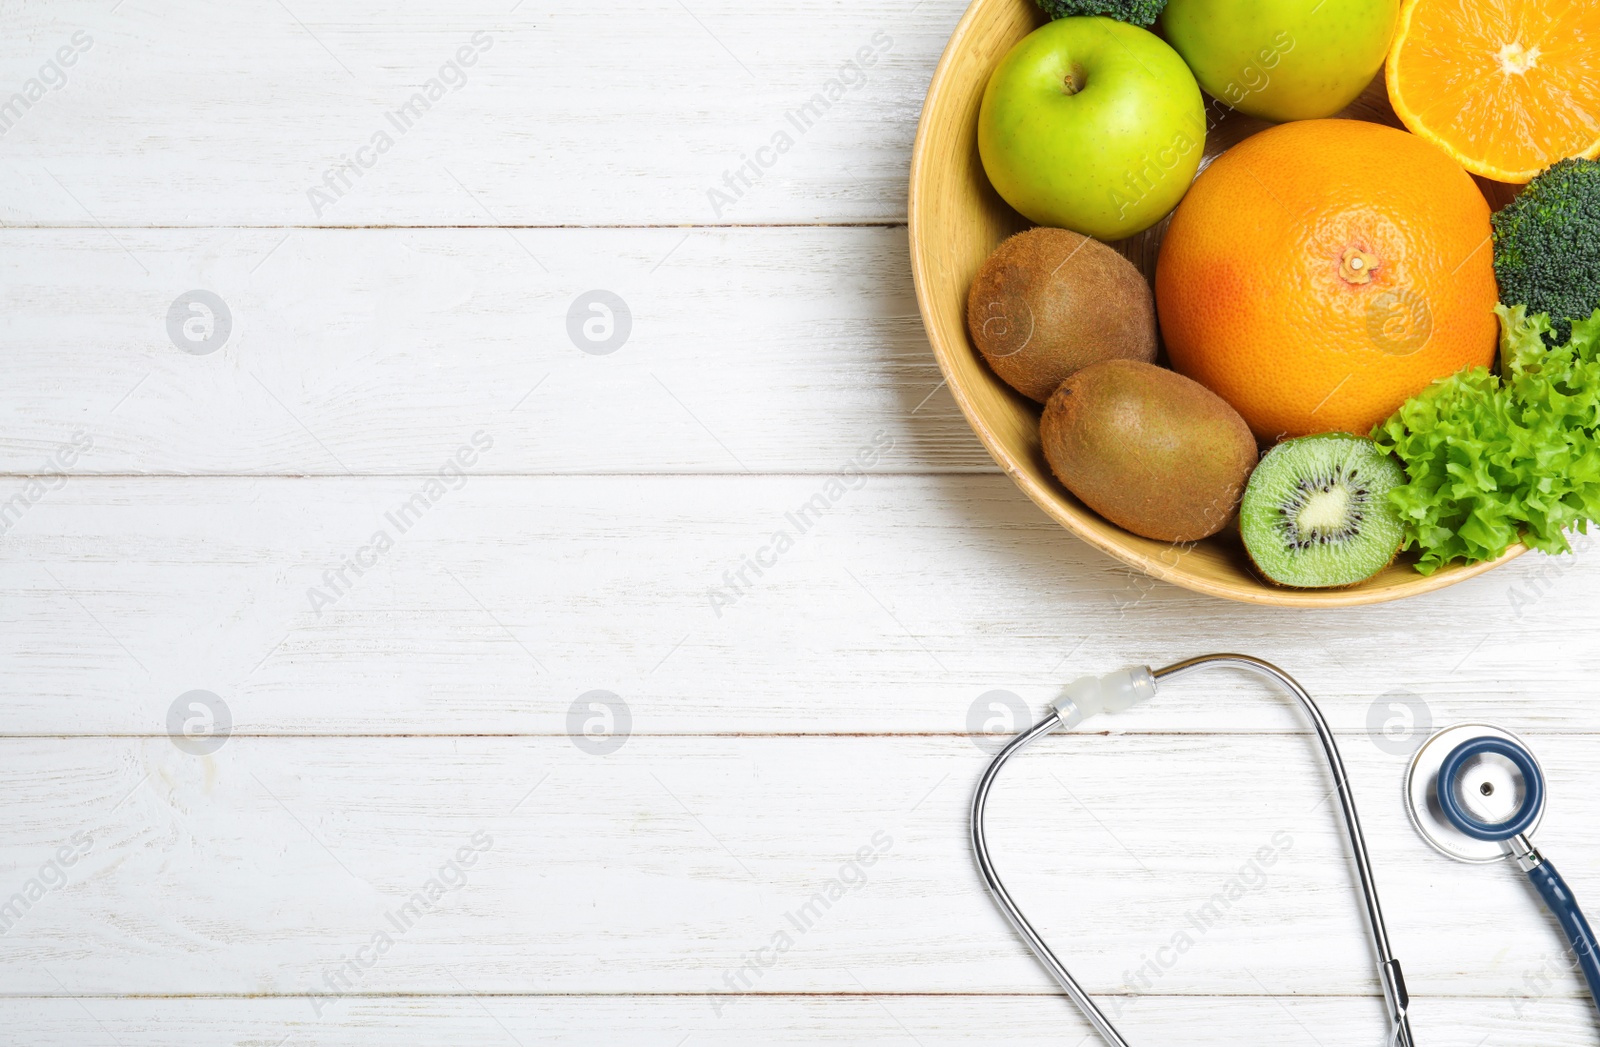 Photo of Fruits, vegetables and stethoscope on white wooden background, flat lay with space for text. Visiting nutritionist